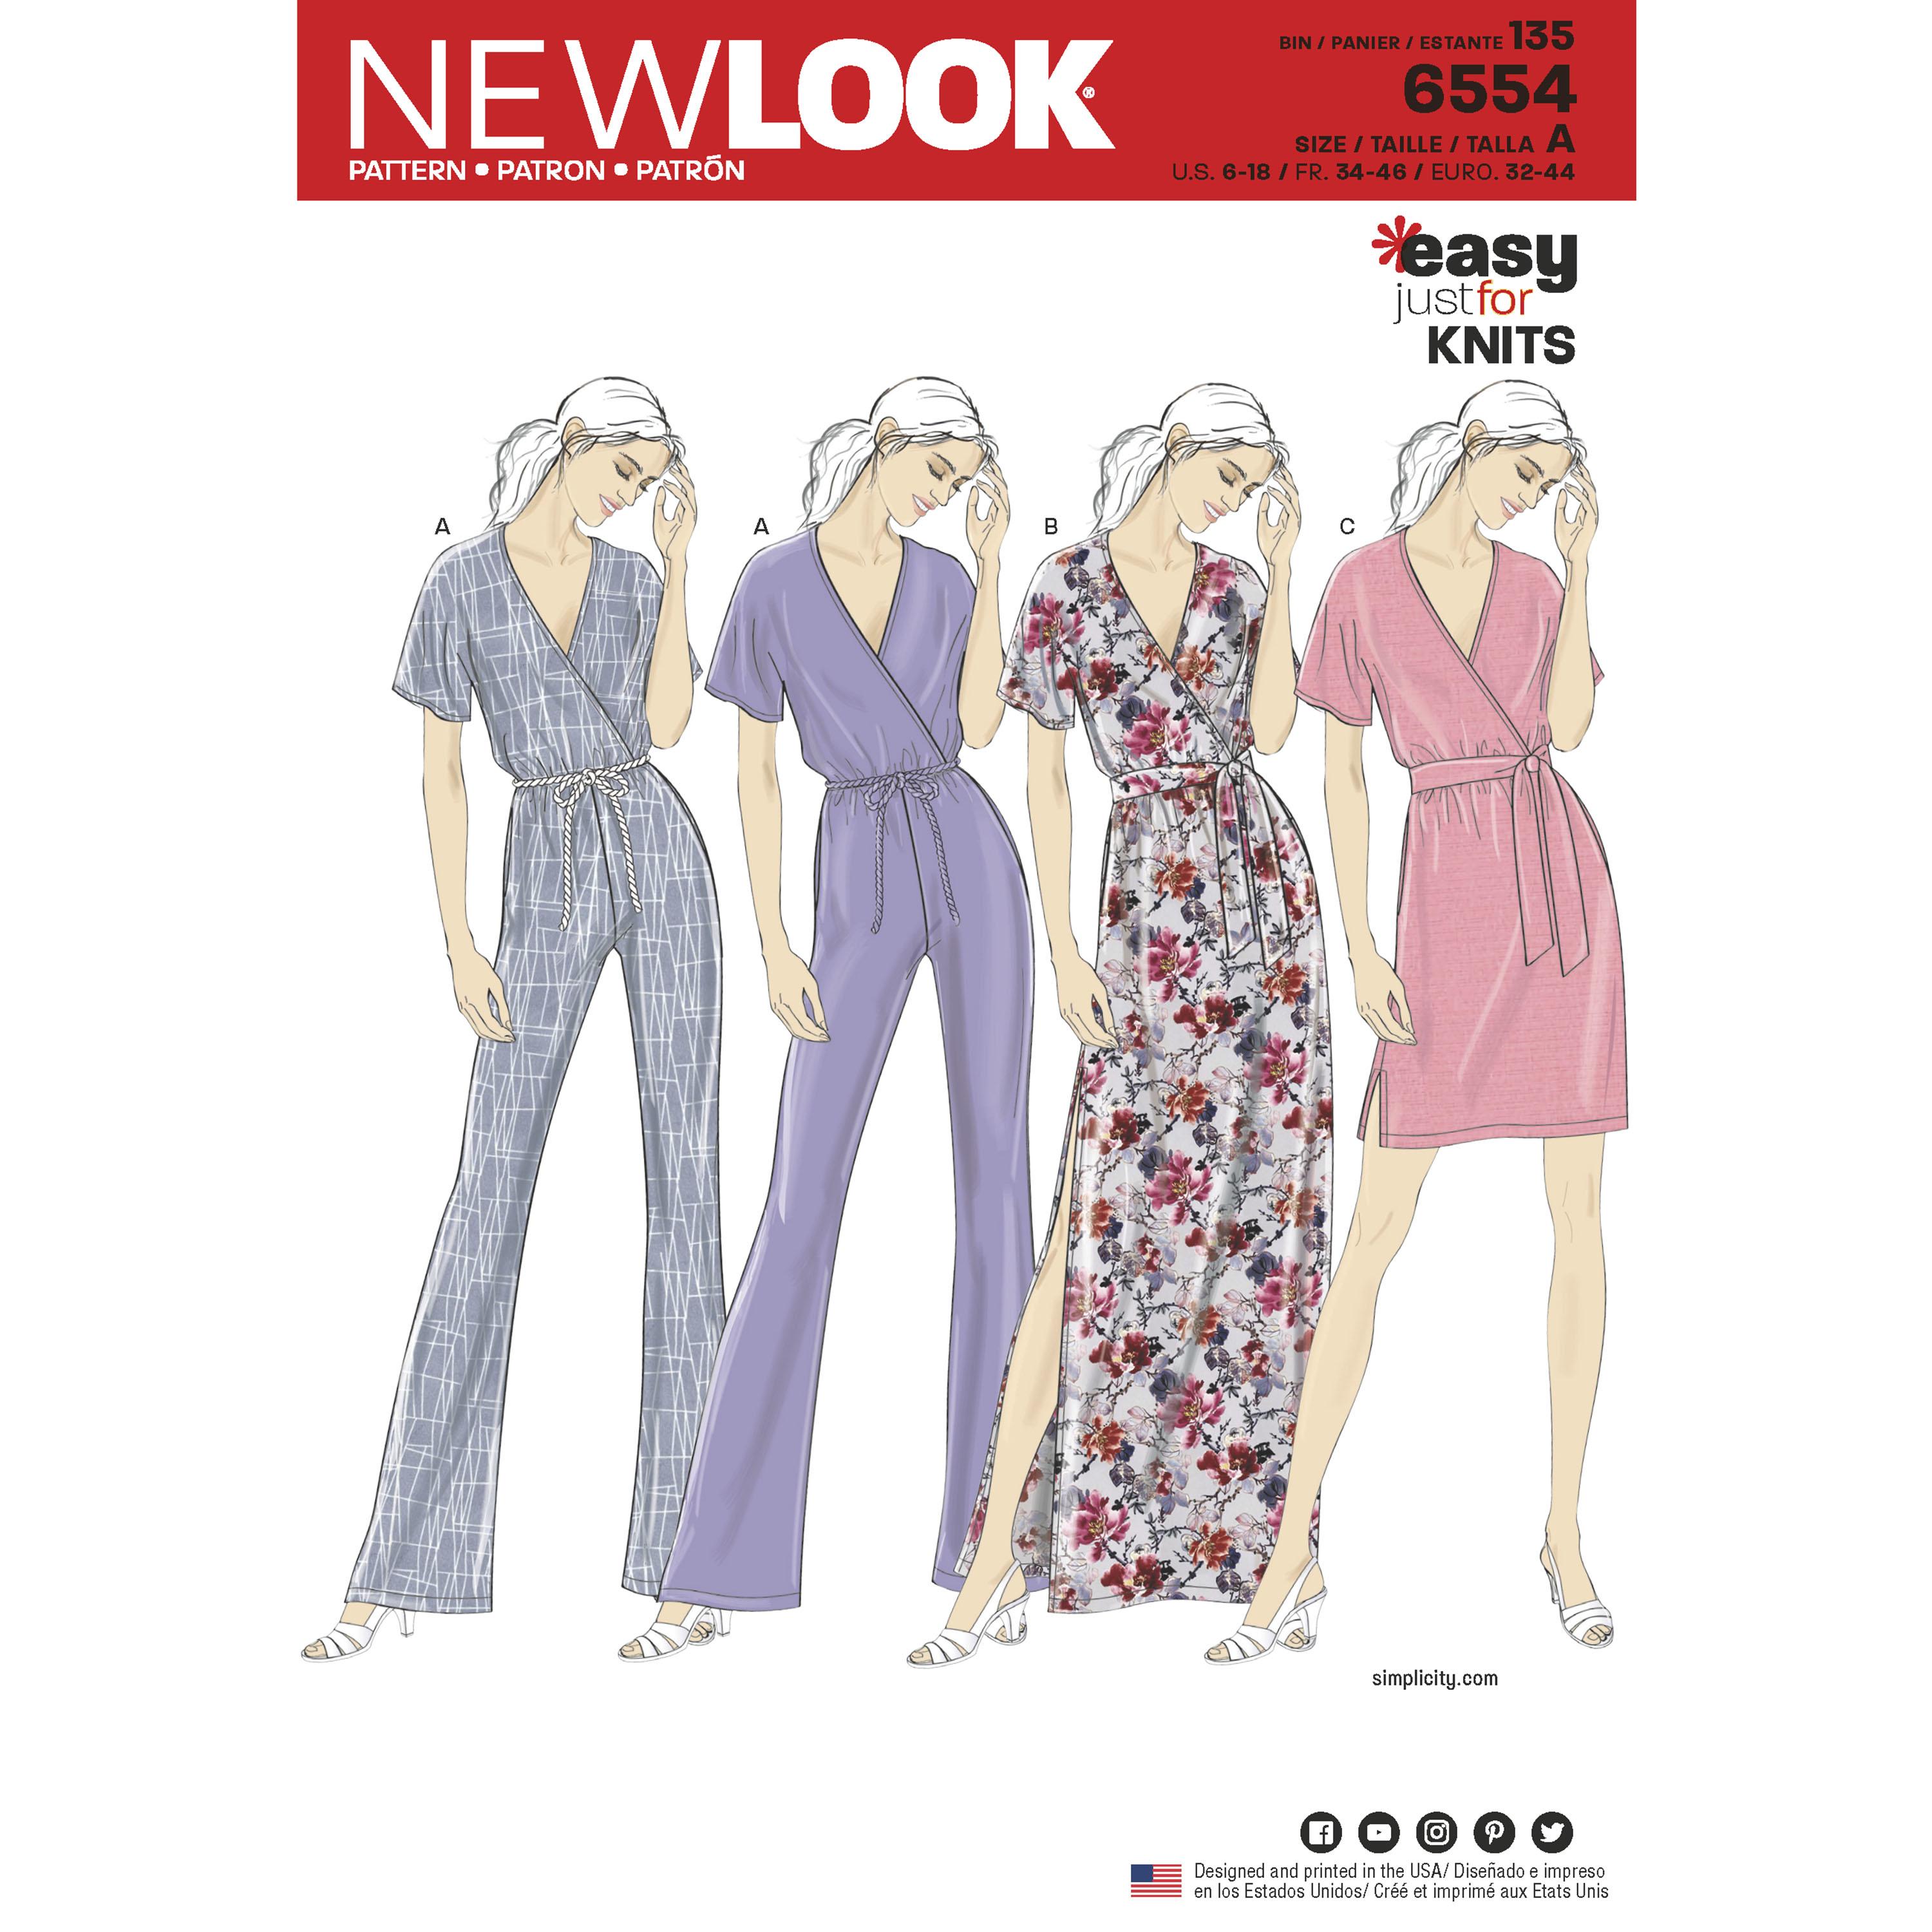 NewLook N6554 Women's Knit Jumpsuit and Dresses